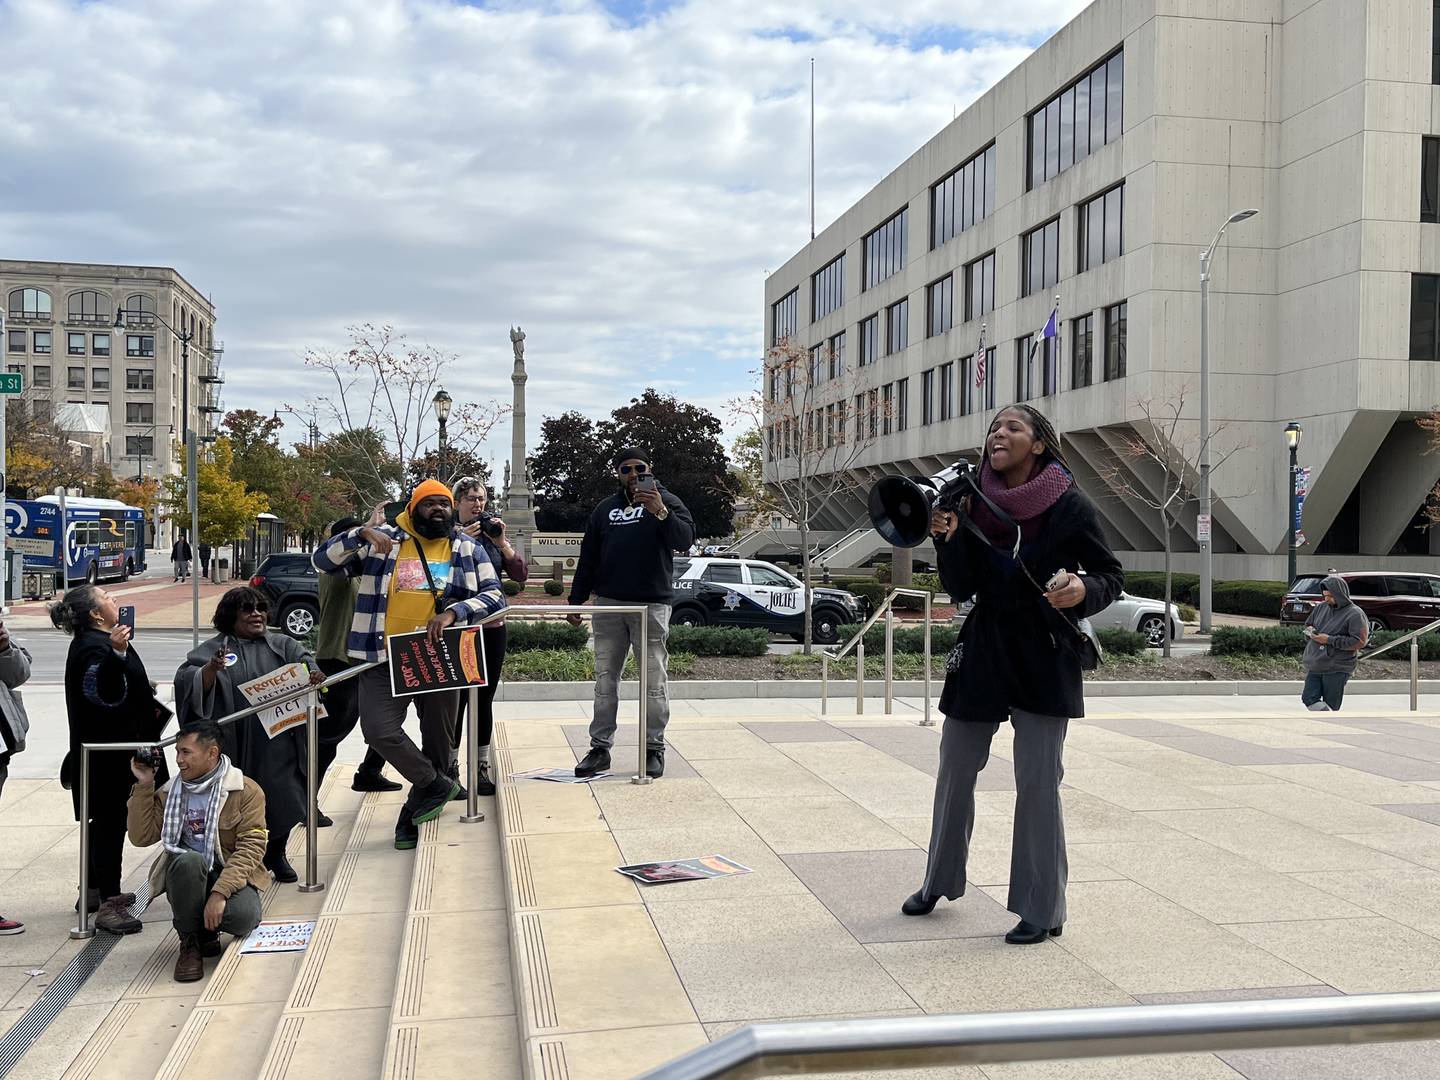 Briana Payton, member of the Illinois Network for Pretrial Justice, holds a megaphone while speaking to a group of protestors gathered in downtown Joliet near the Will County Courthouse on Thursday, Oct. 20, 2022, in support of the SAFE-T Act.